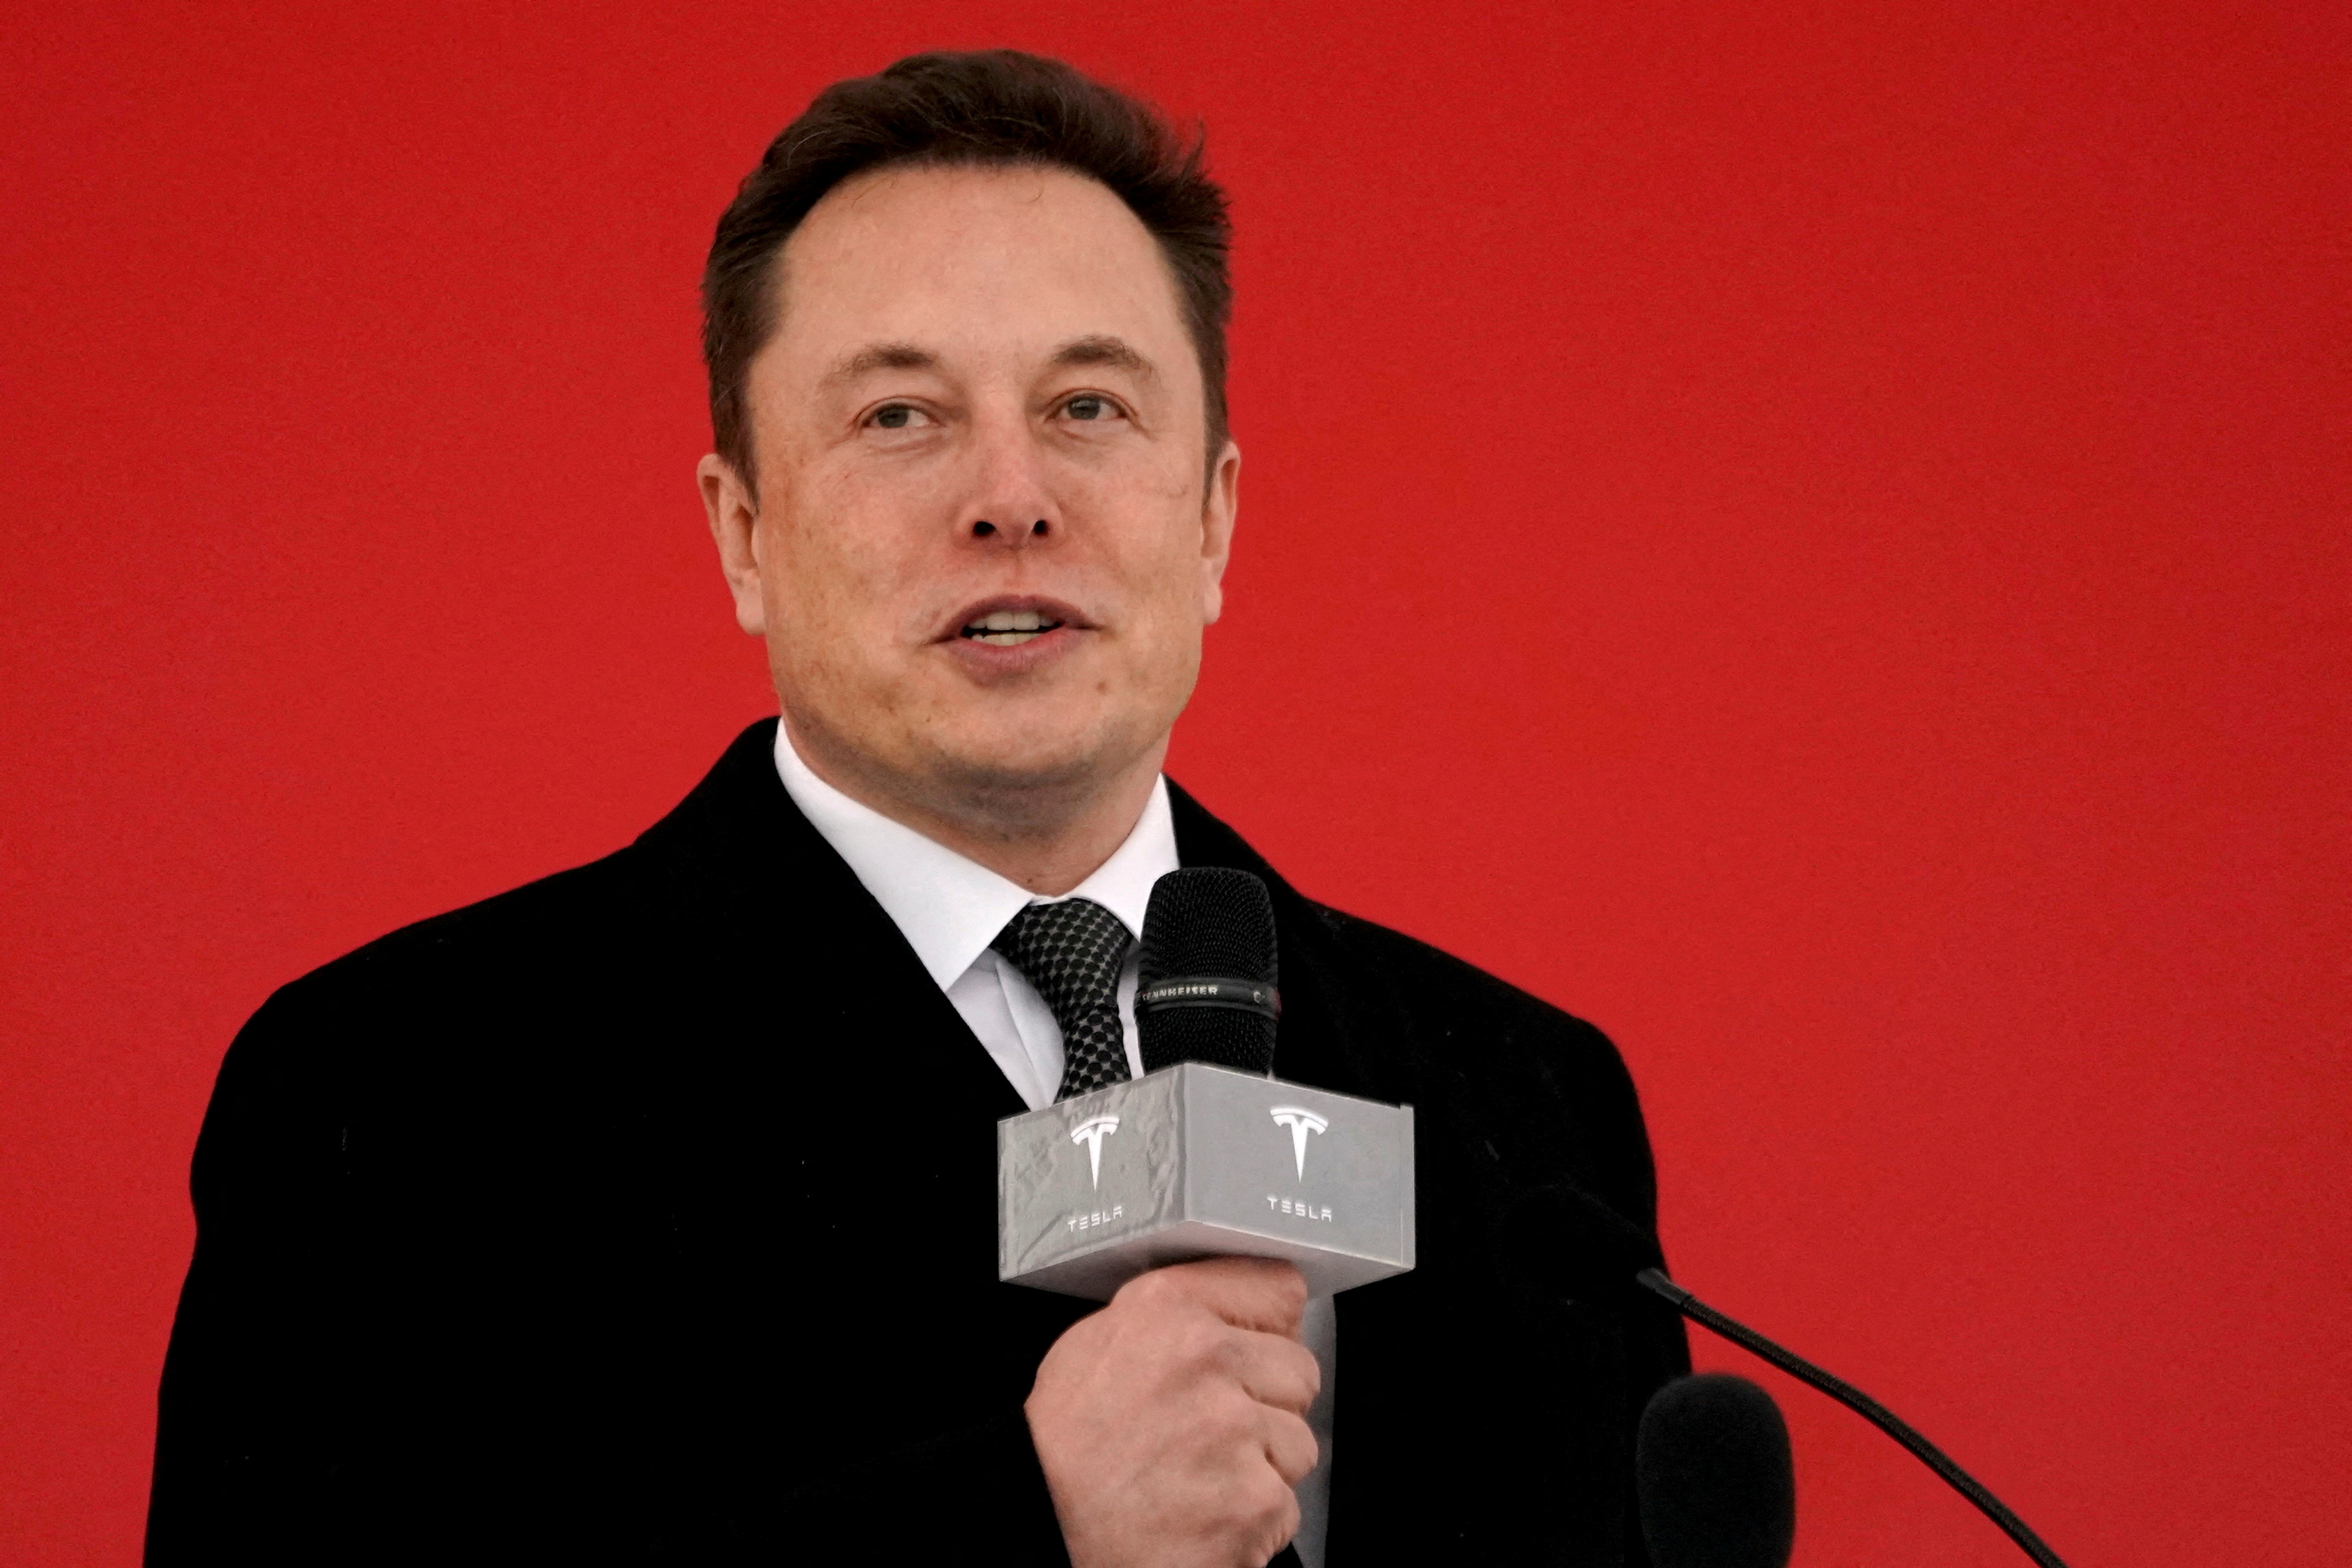 Elon Musk’s ultimatum to Tesla employees: ‘Come to office or get out’